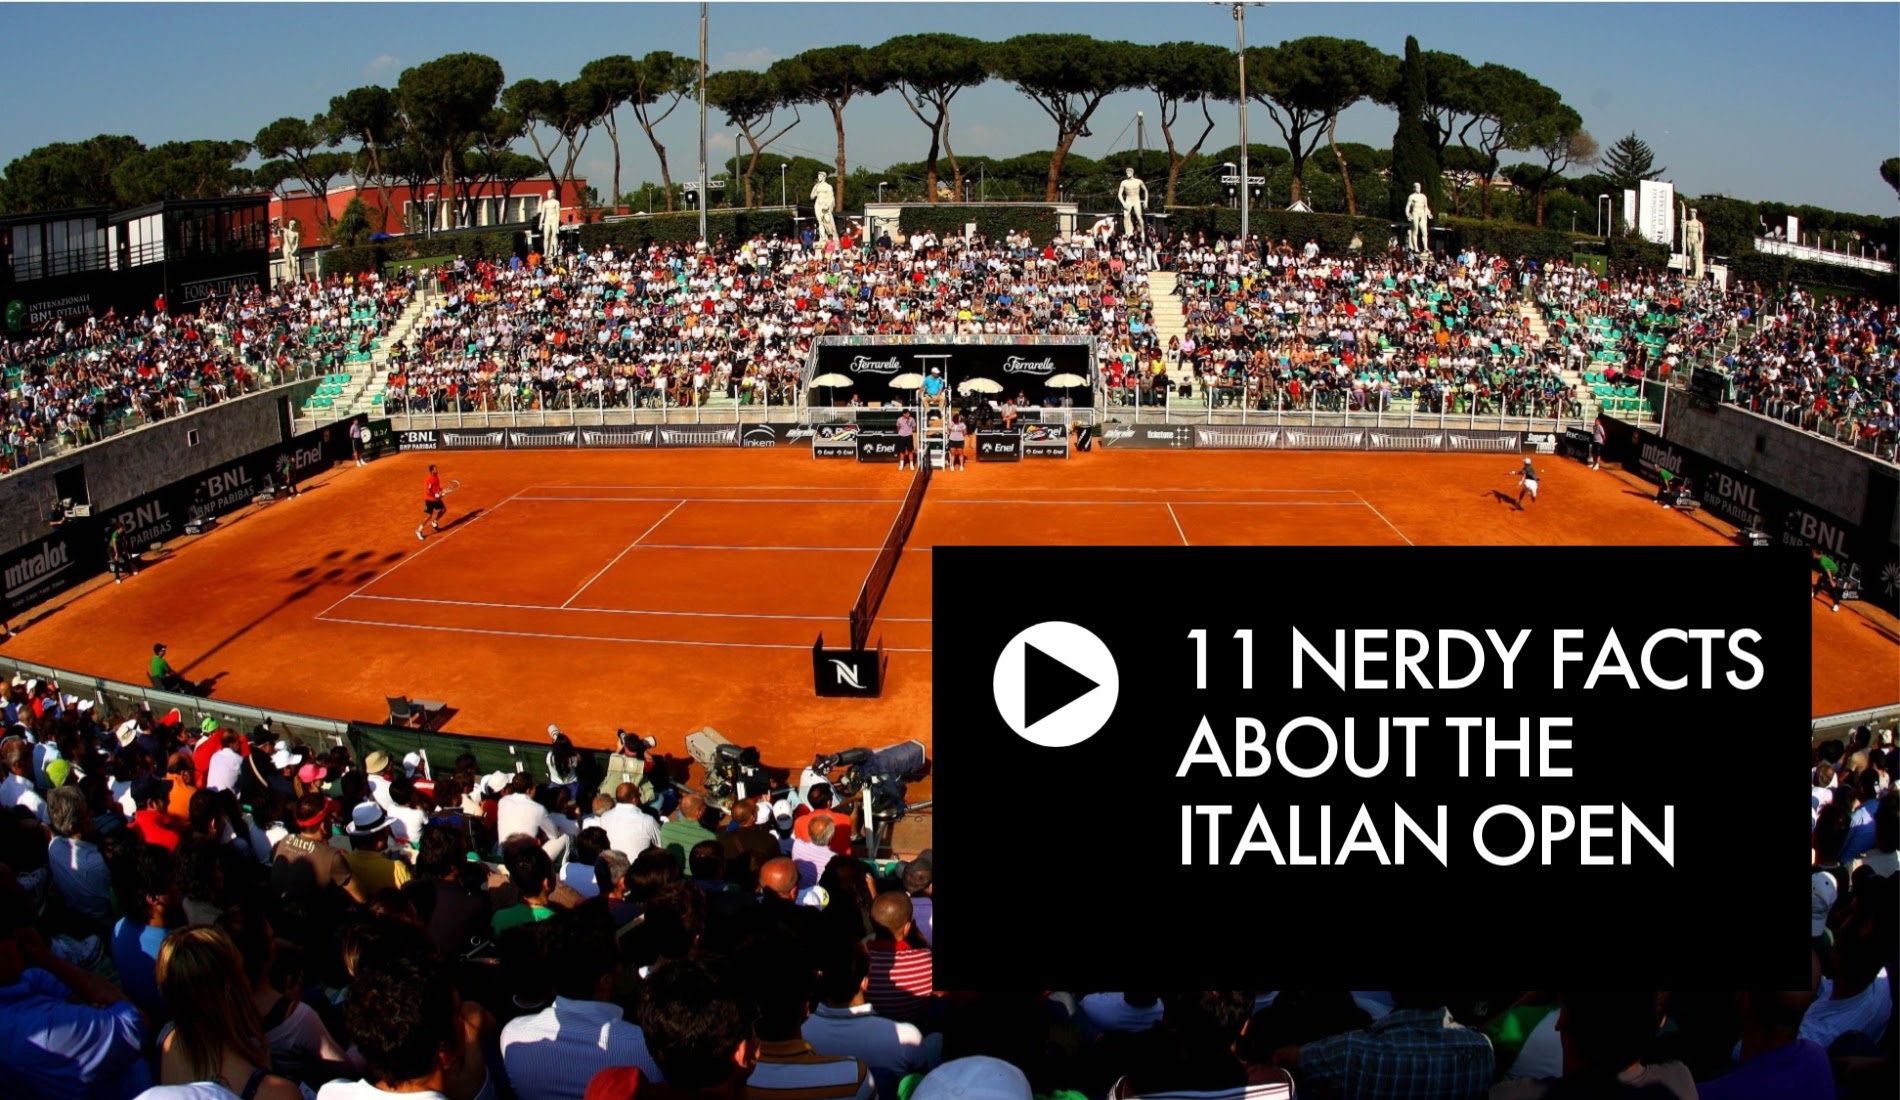 Check out our 11 nerdy facts about the Italian Open